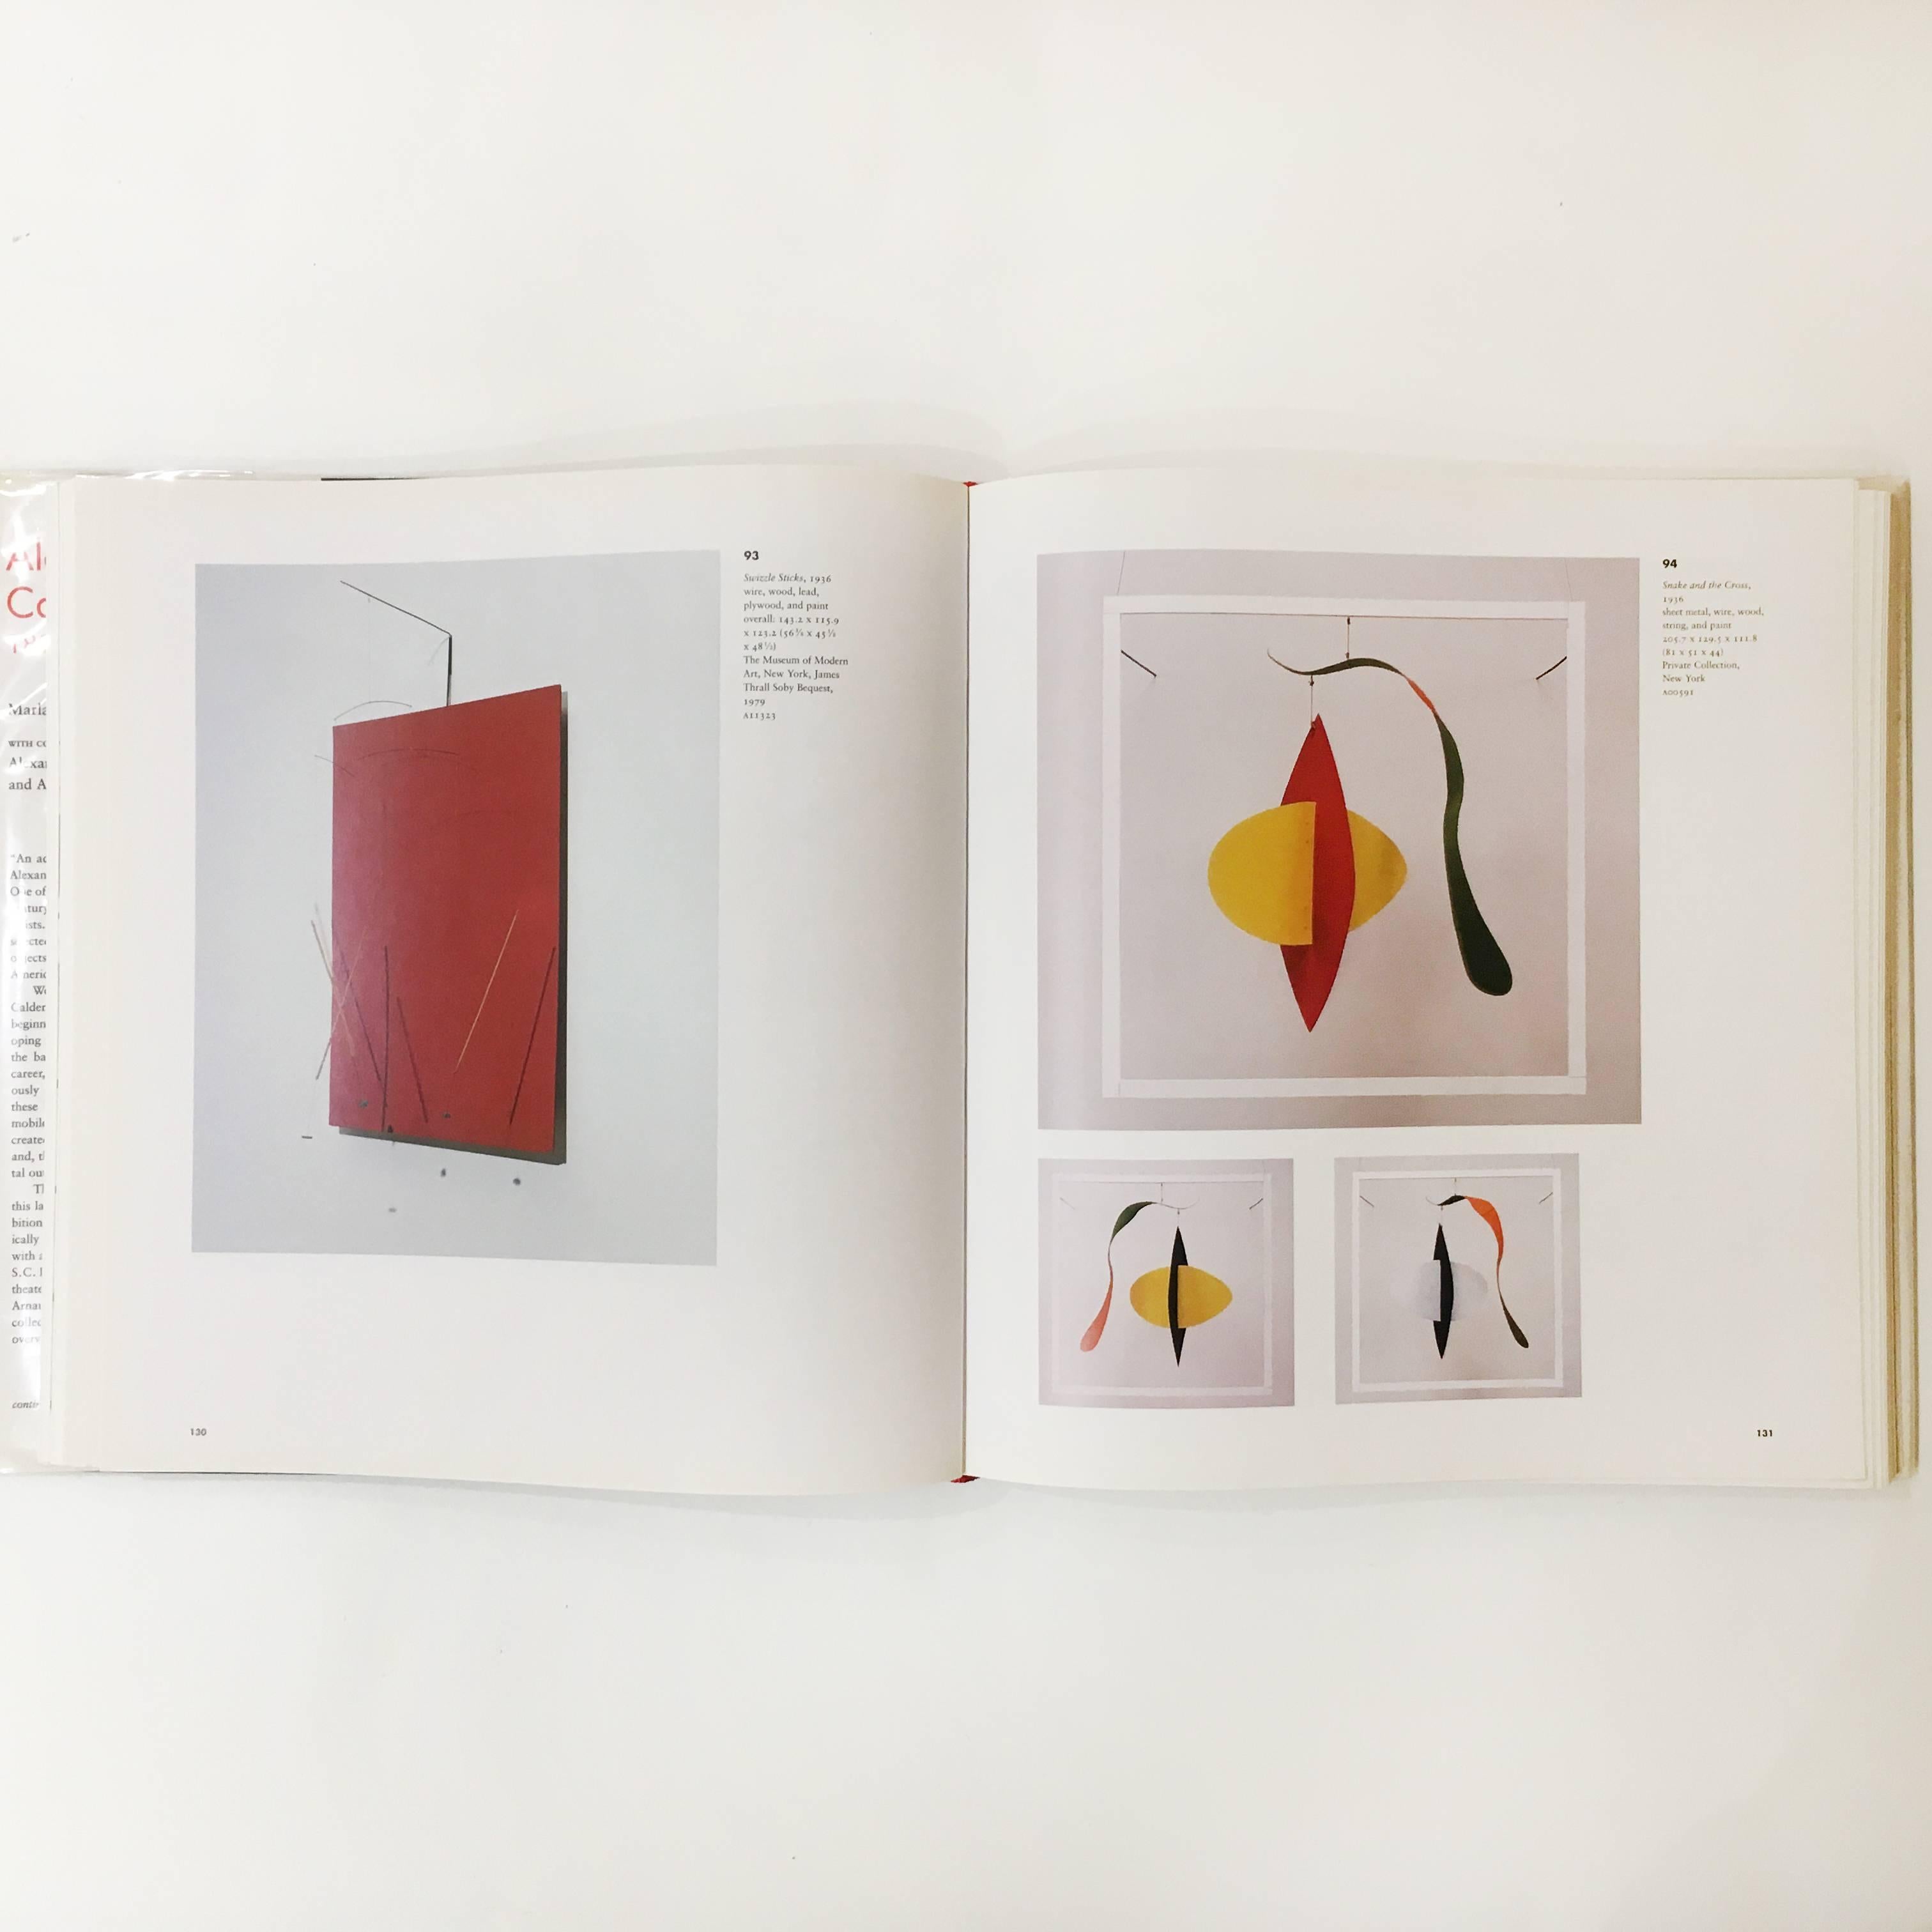 First edition, published by National Gallery of Art Washington & Yale University Press, 1998.

The dynamic work of Alexander Calder has influenced generations of artists and designers. Focusing on 267 works of art, this stunning oversized